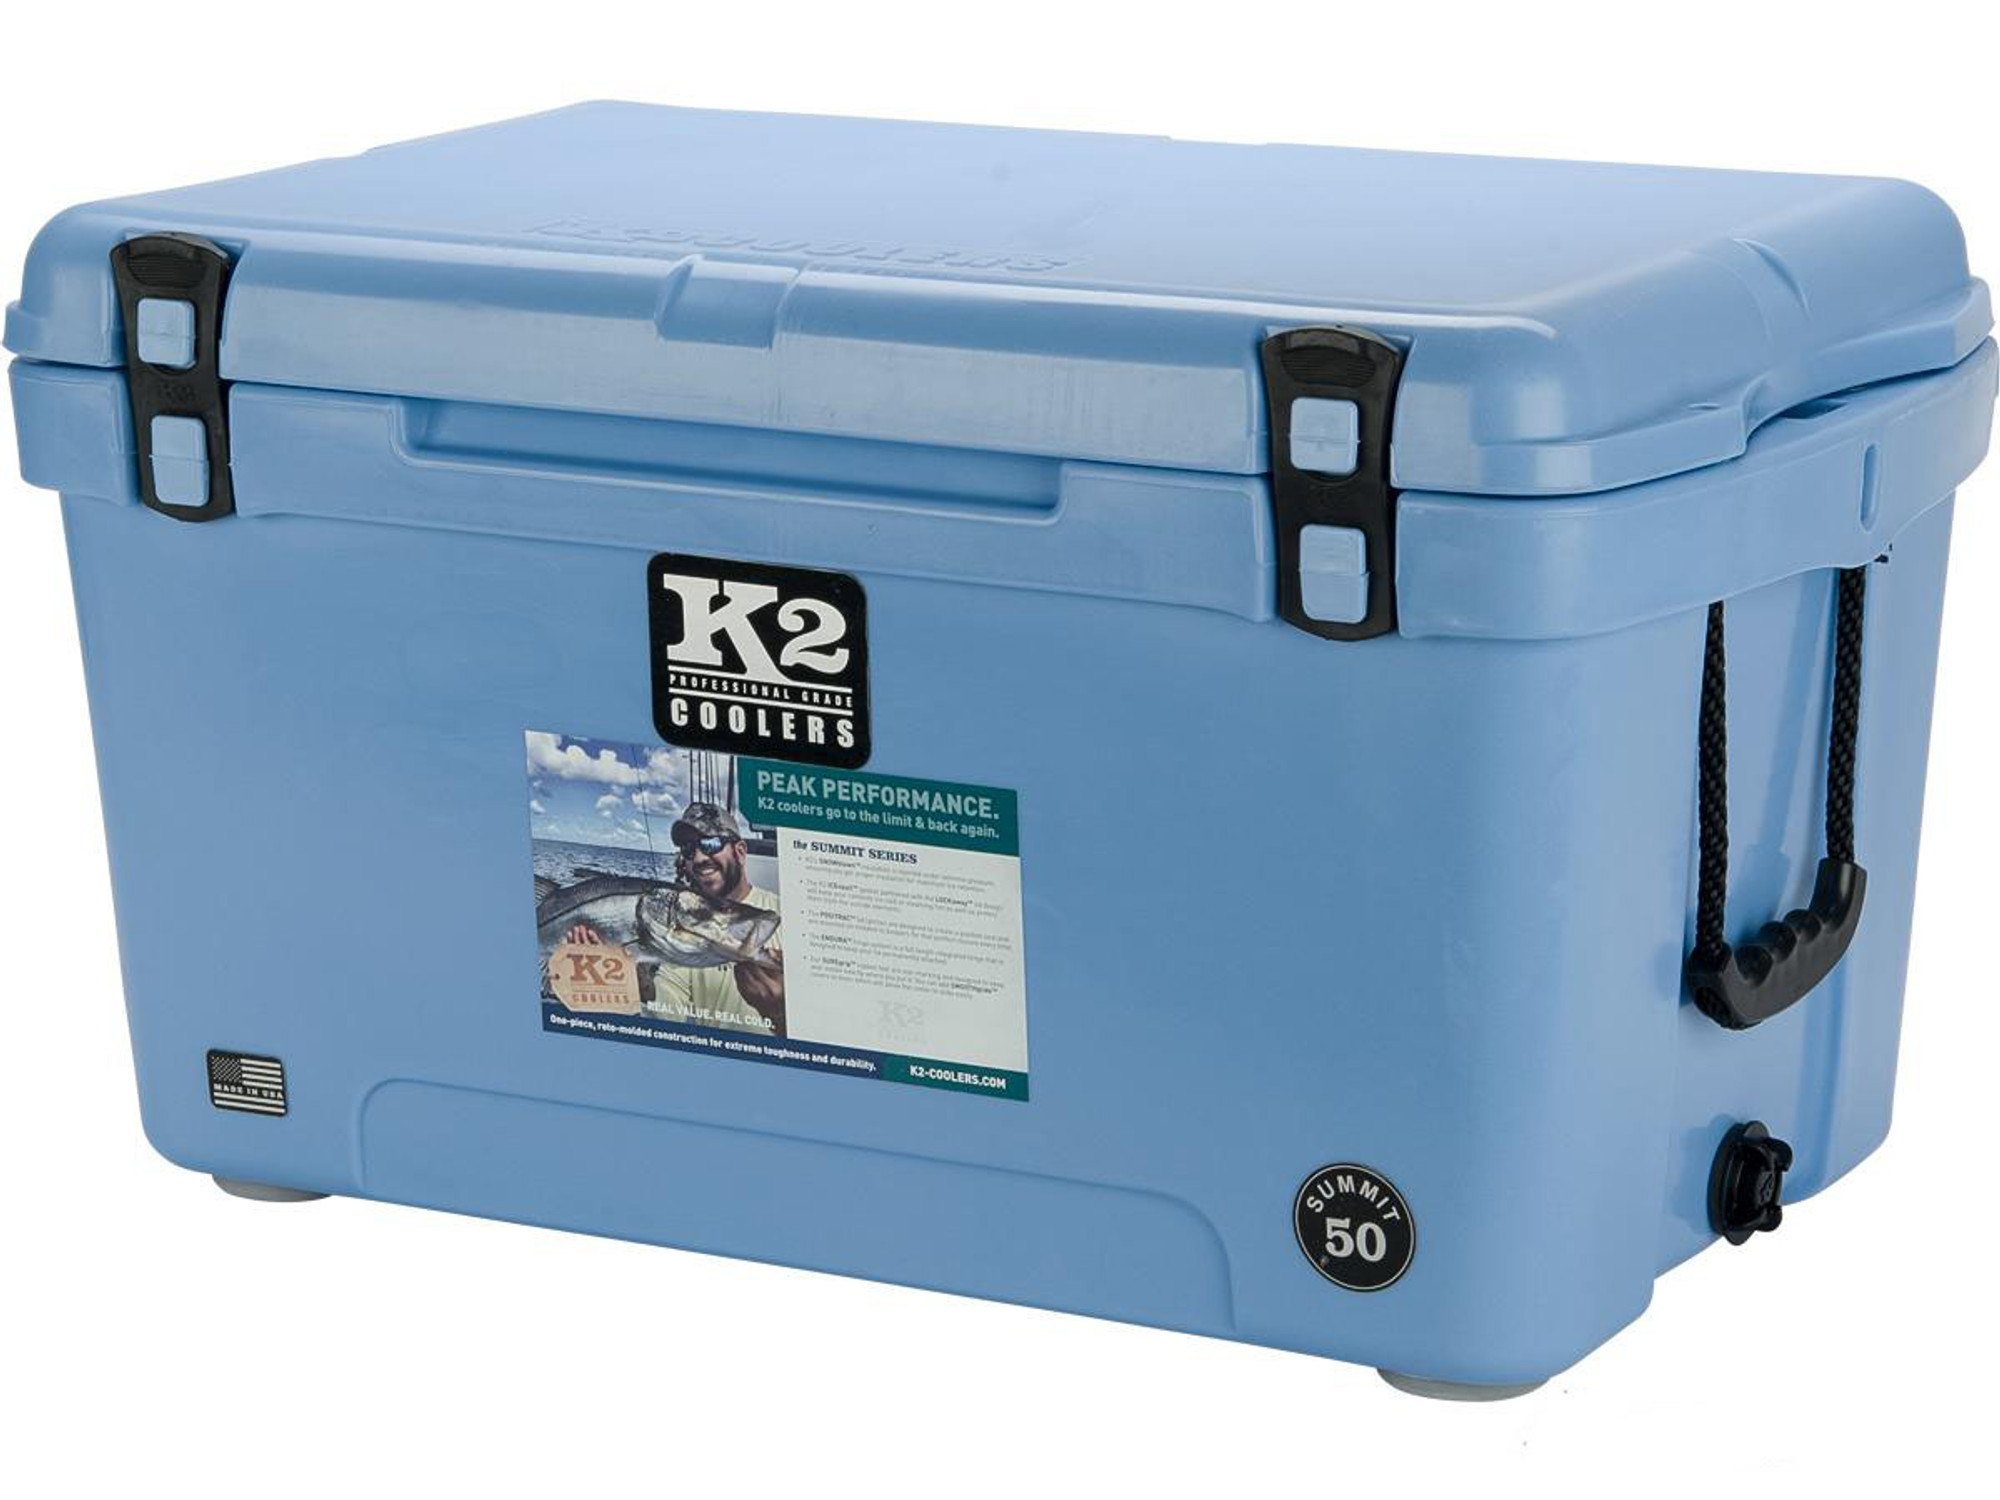 K2 Coolers Summit 50 Ice Chest (Color: Cool Blue)